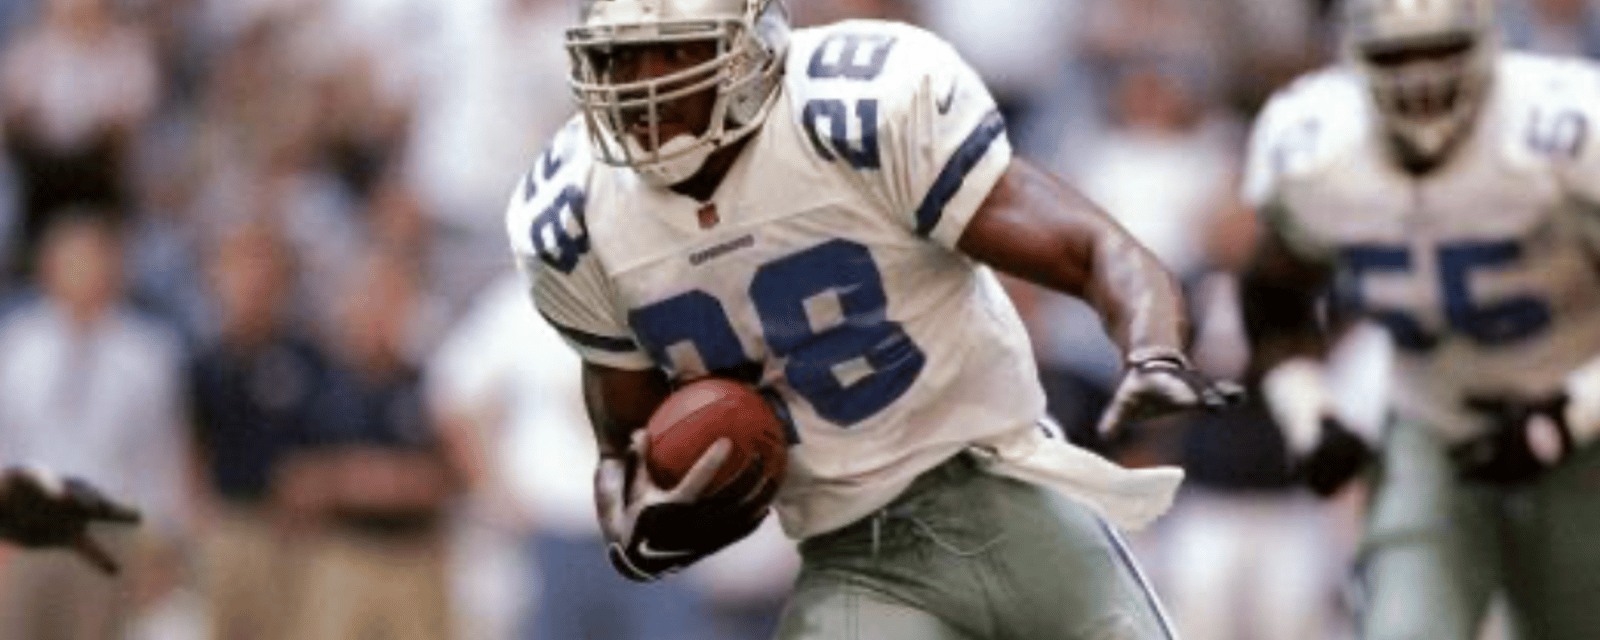 Darren Woodson warns Cowboys players of Mike Zimmer